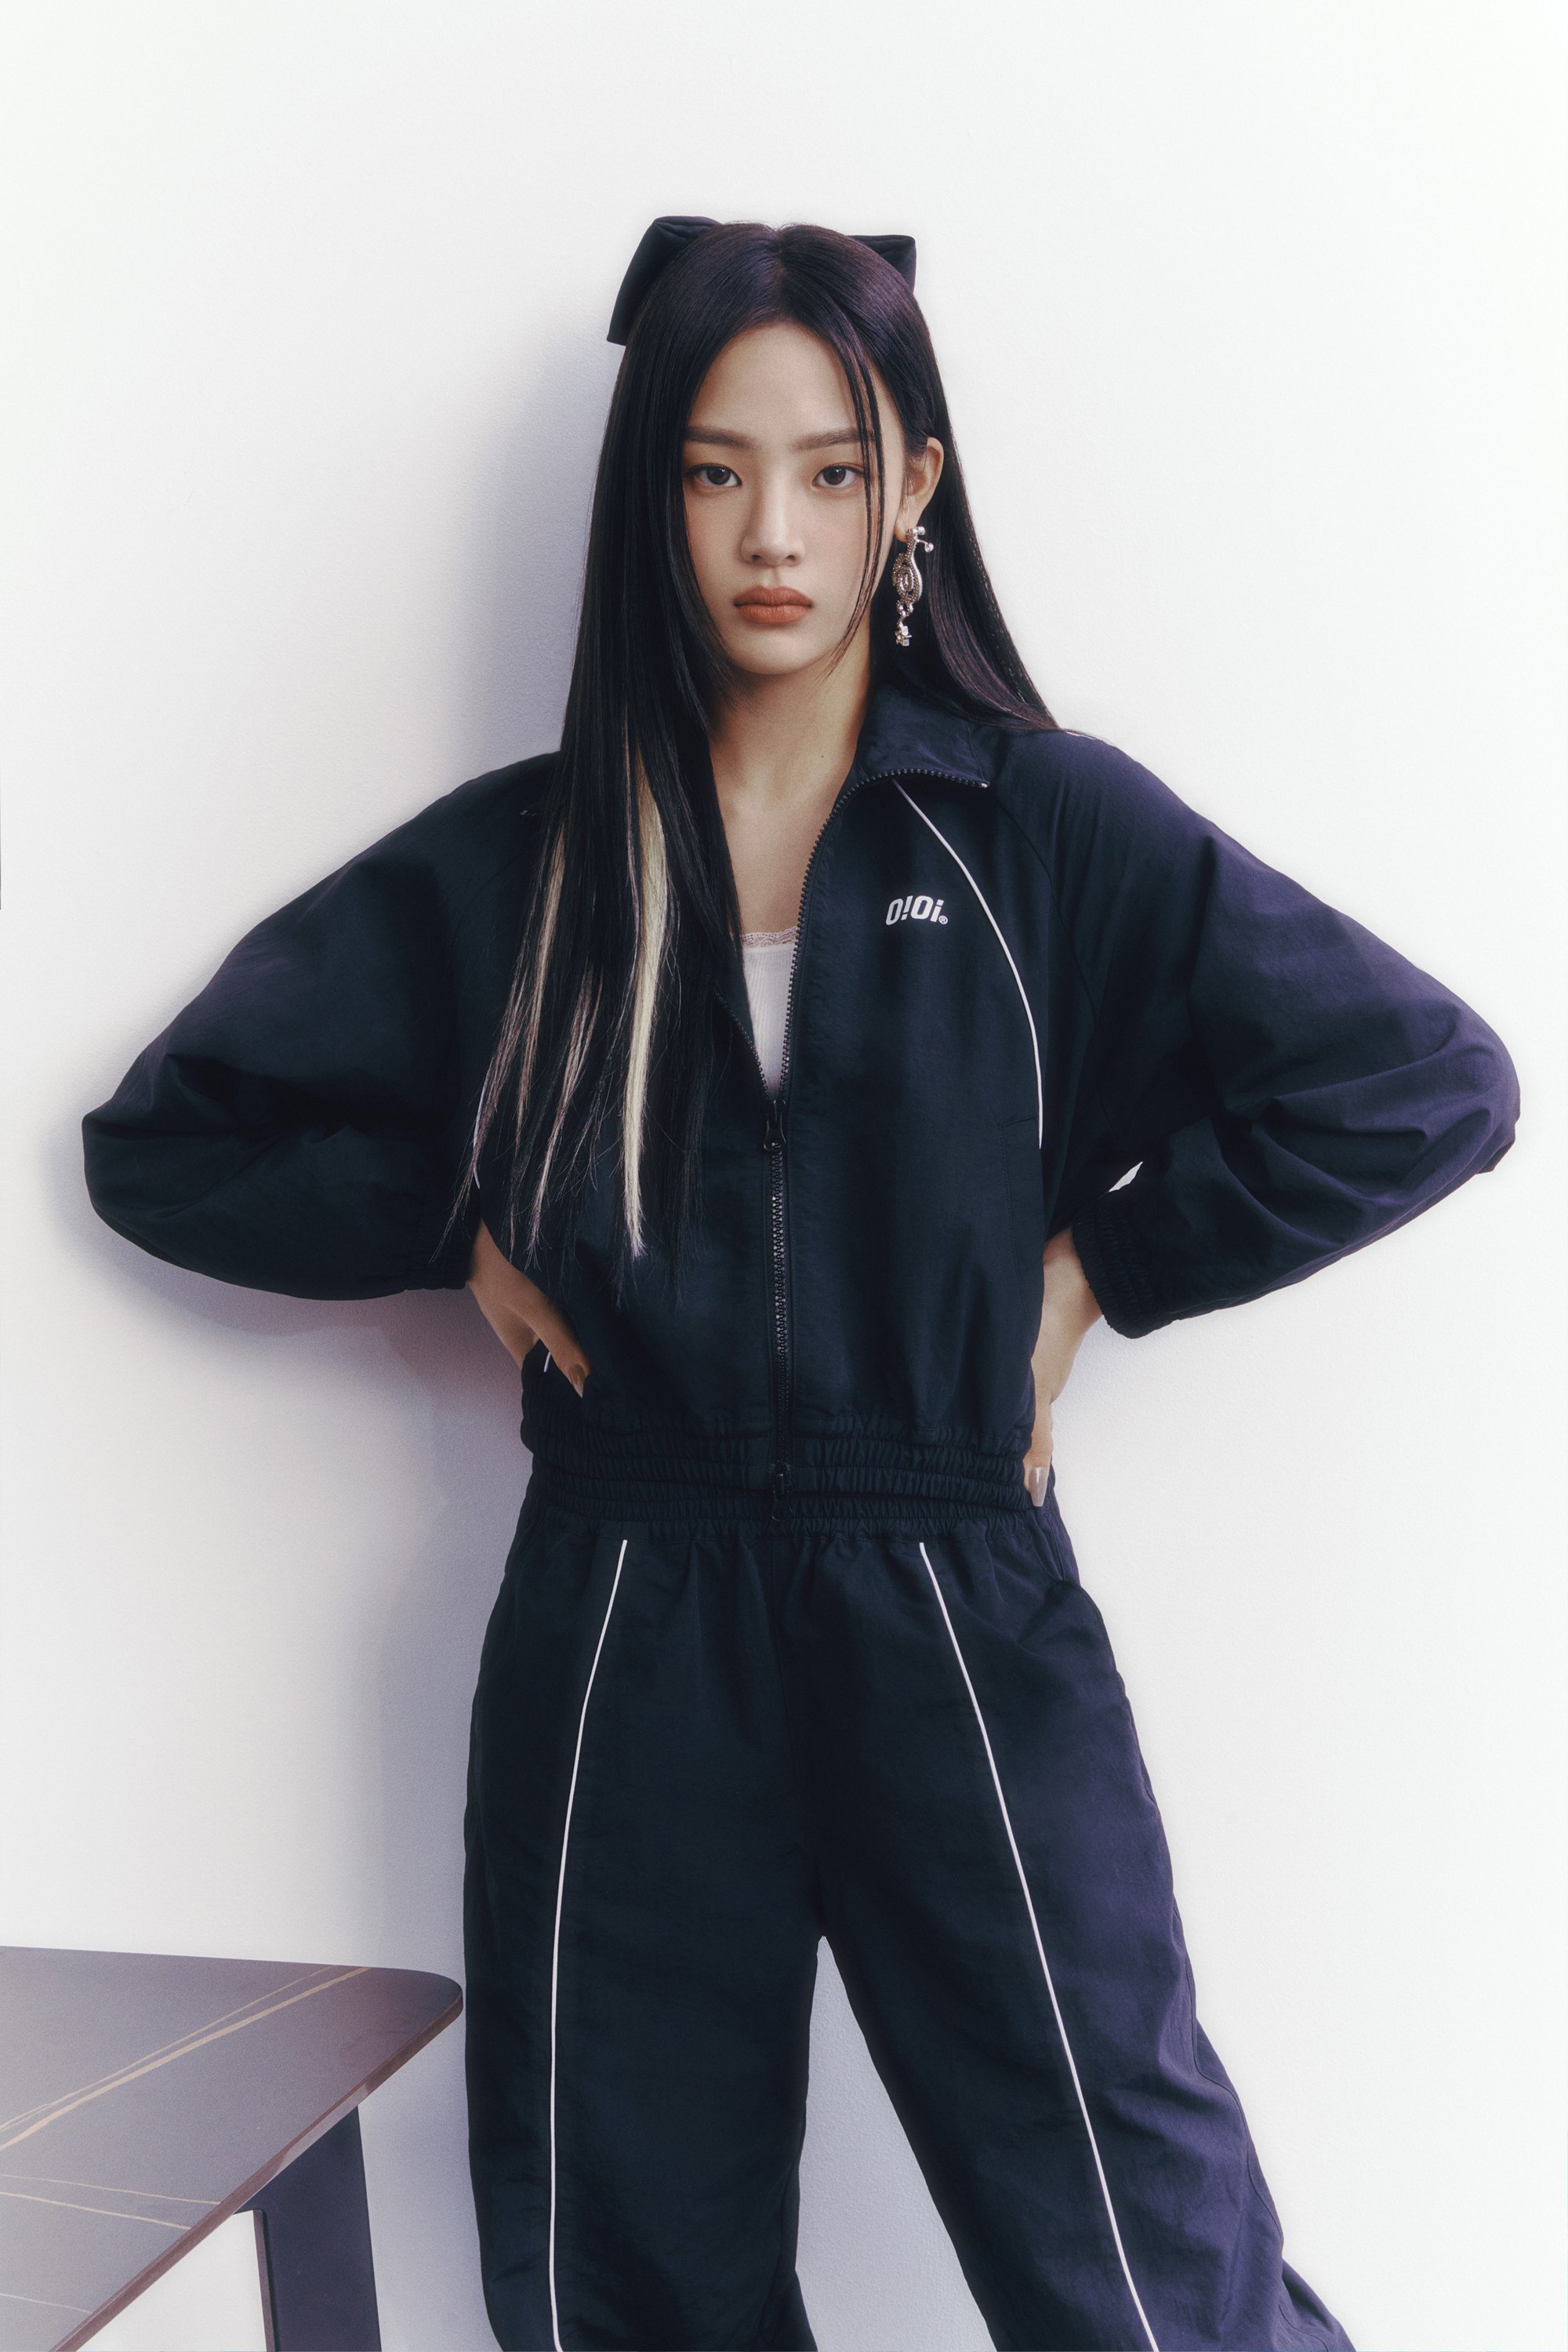 NewJeans’ Minji might be only 18, but her brand power is already impressive. Photo: O!Oi